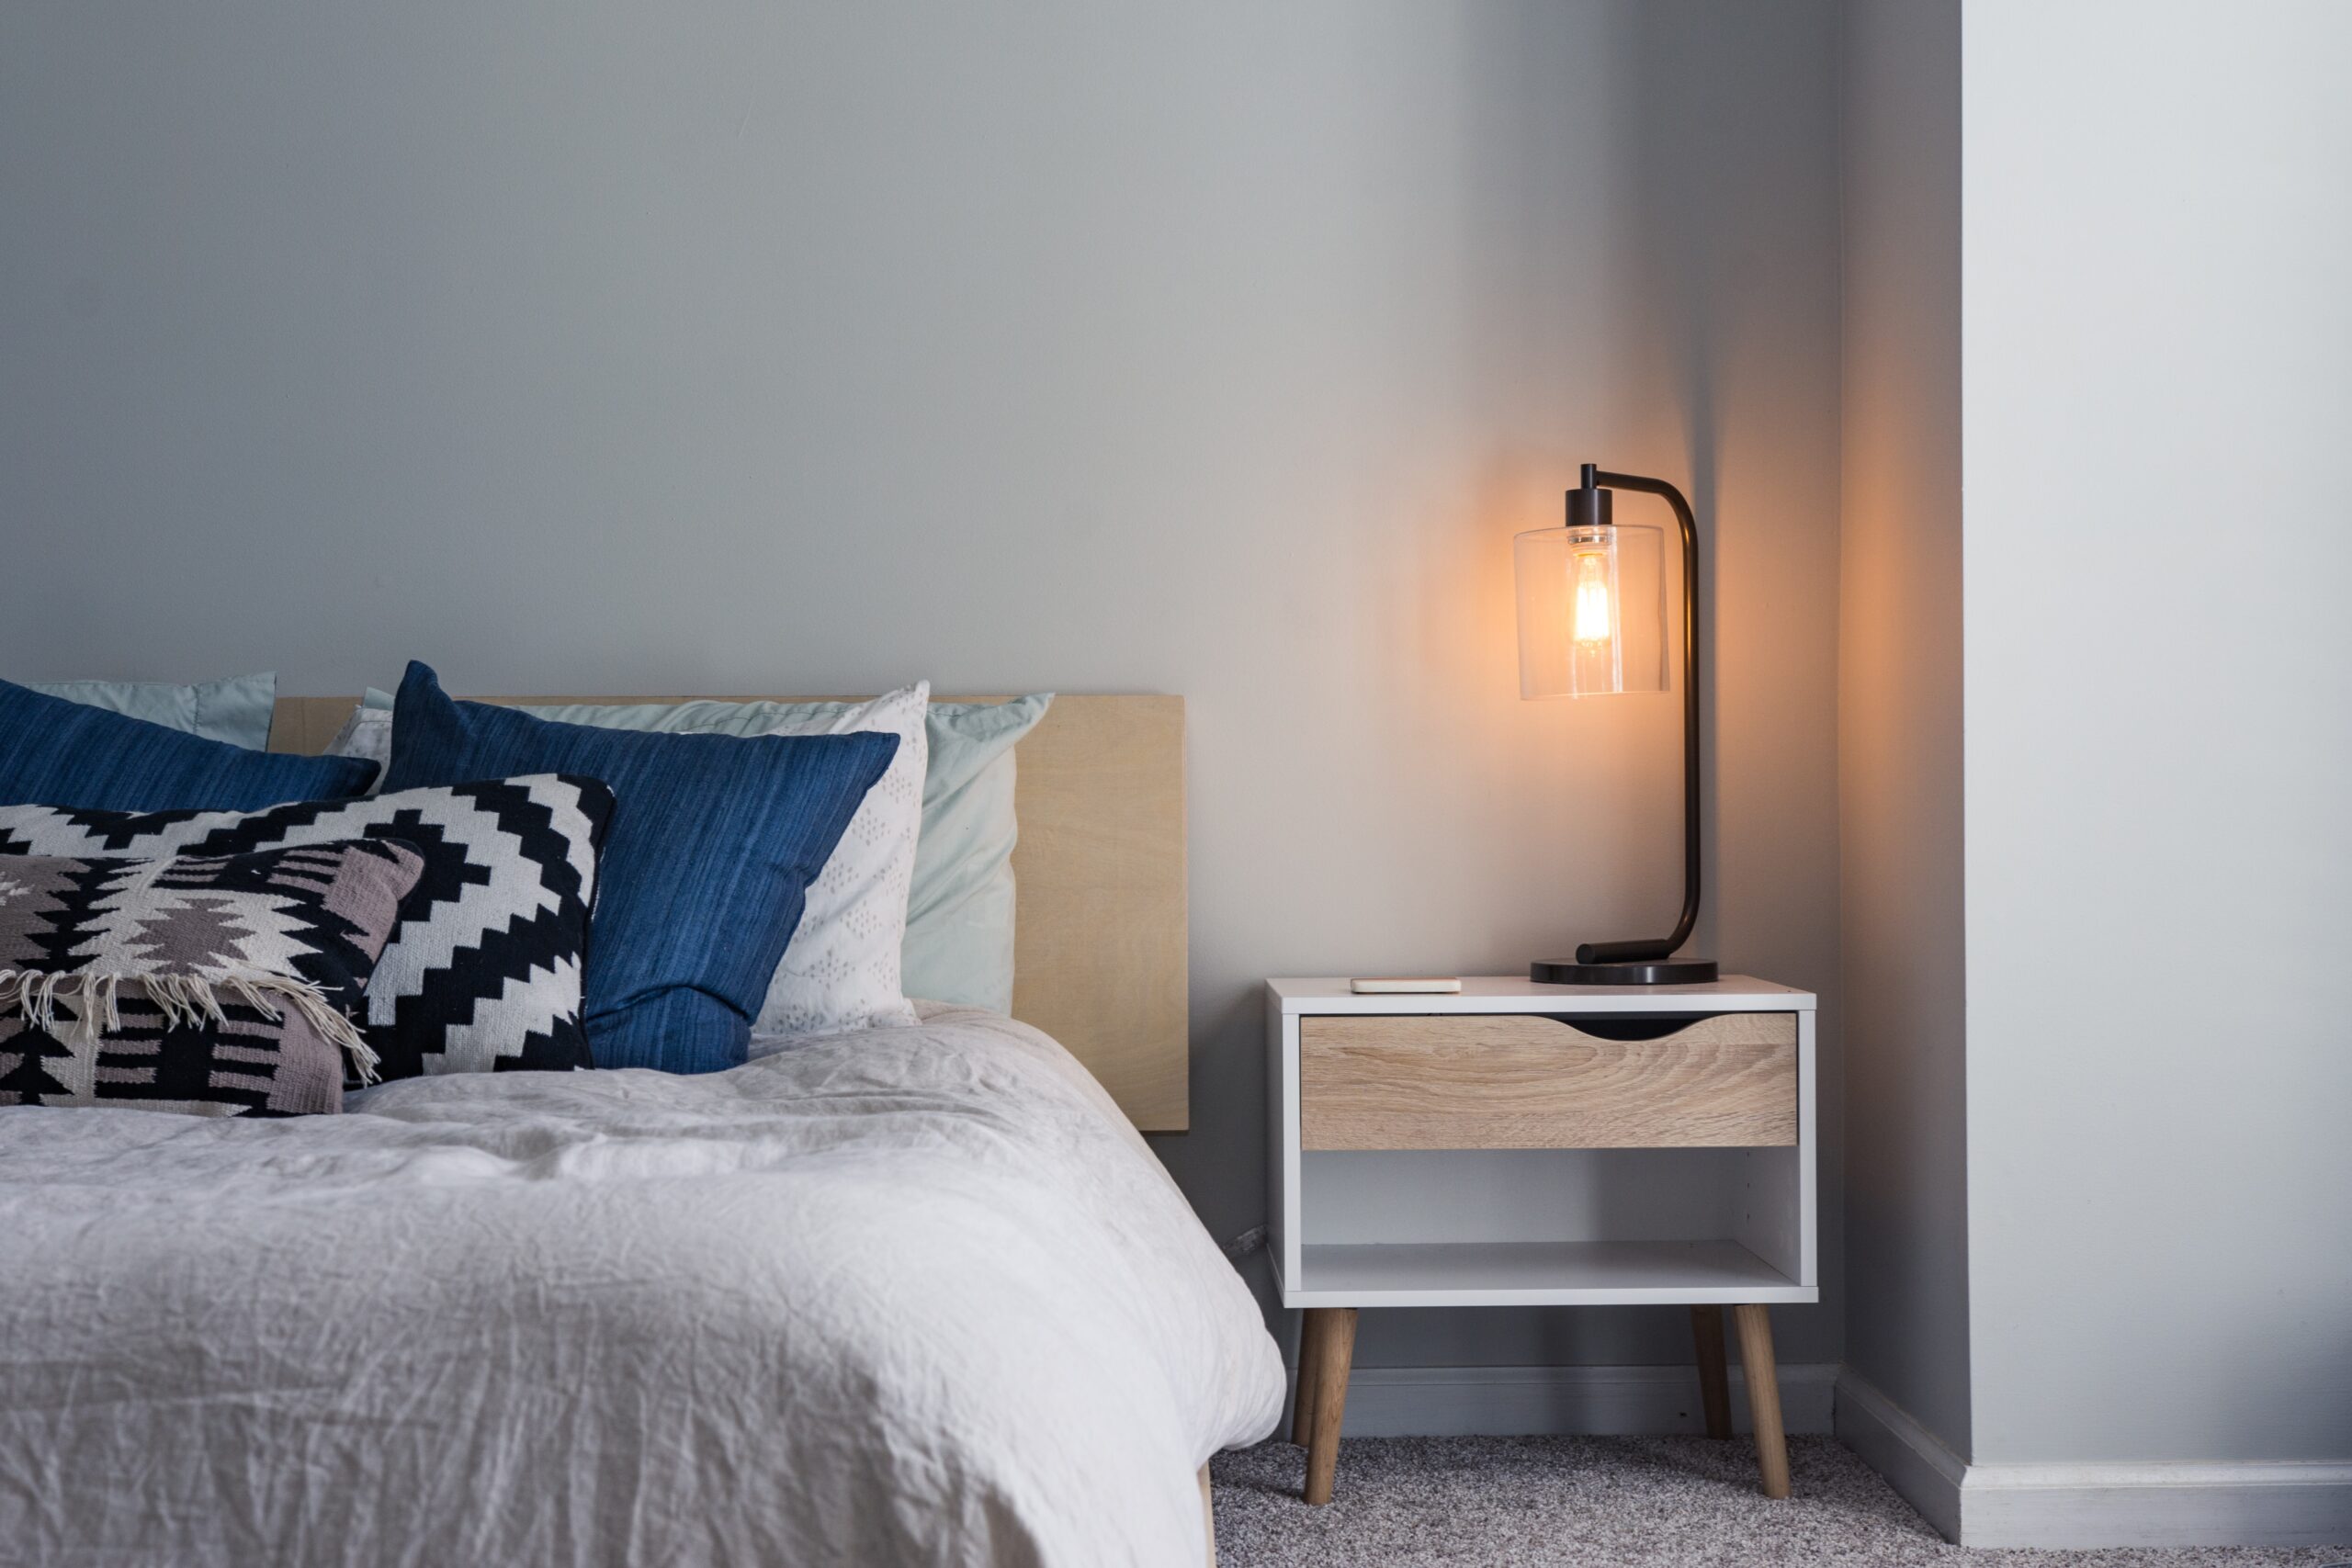 Use the open shelf Ikea nightstand hack to display books, artwork, items and more. Pictured: A nightstand.